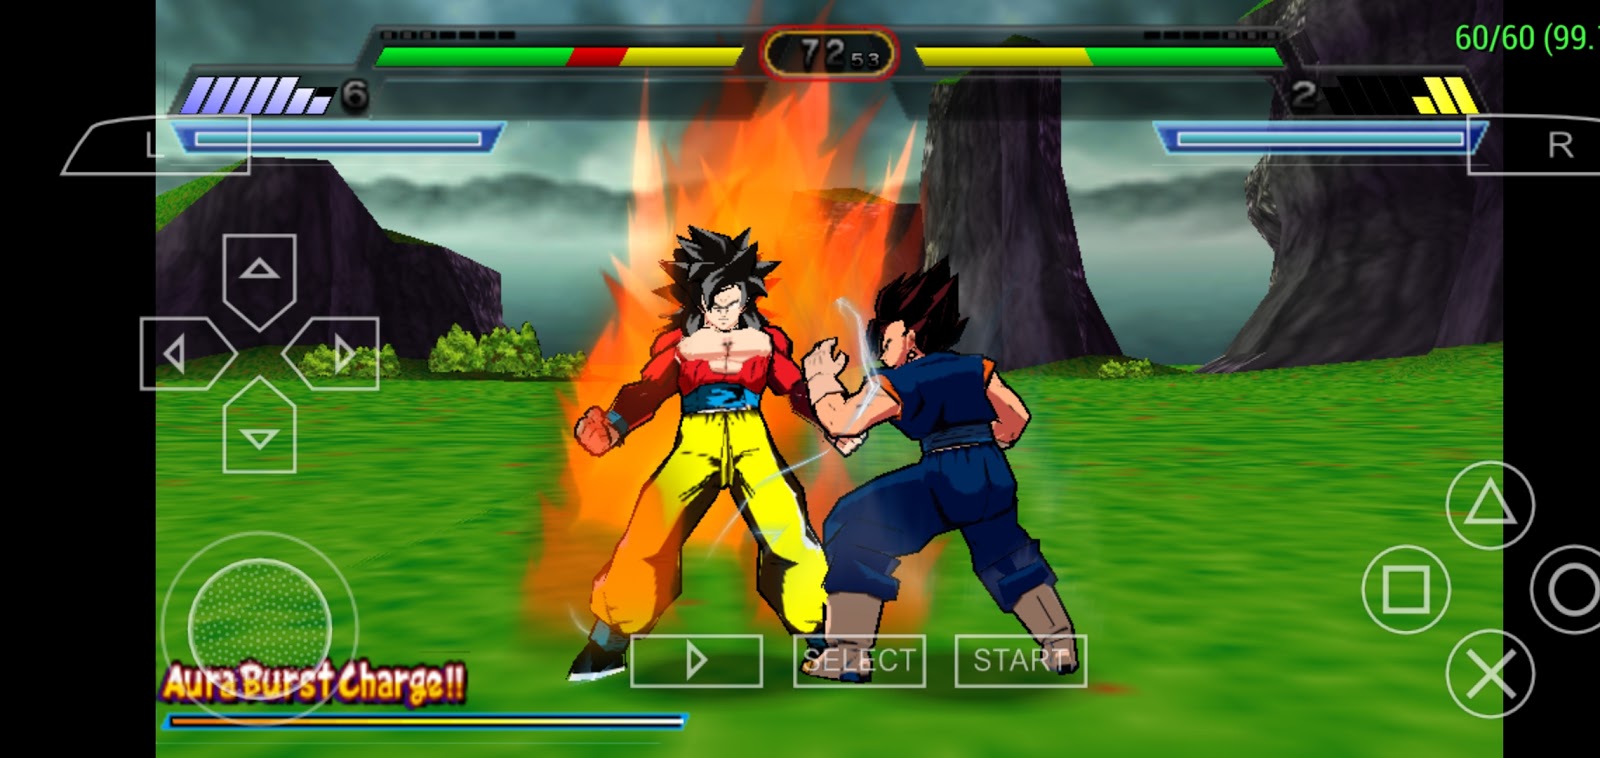 Dragon Ball Z Xenoverse Game Download For Ppsspp renewpe